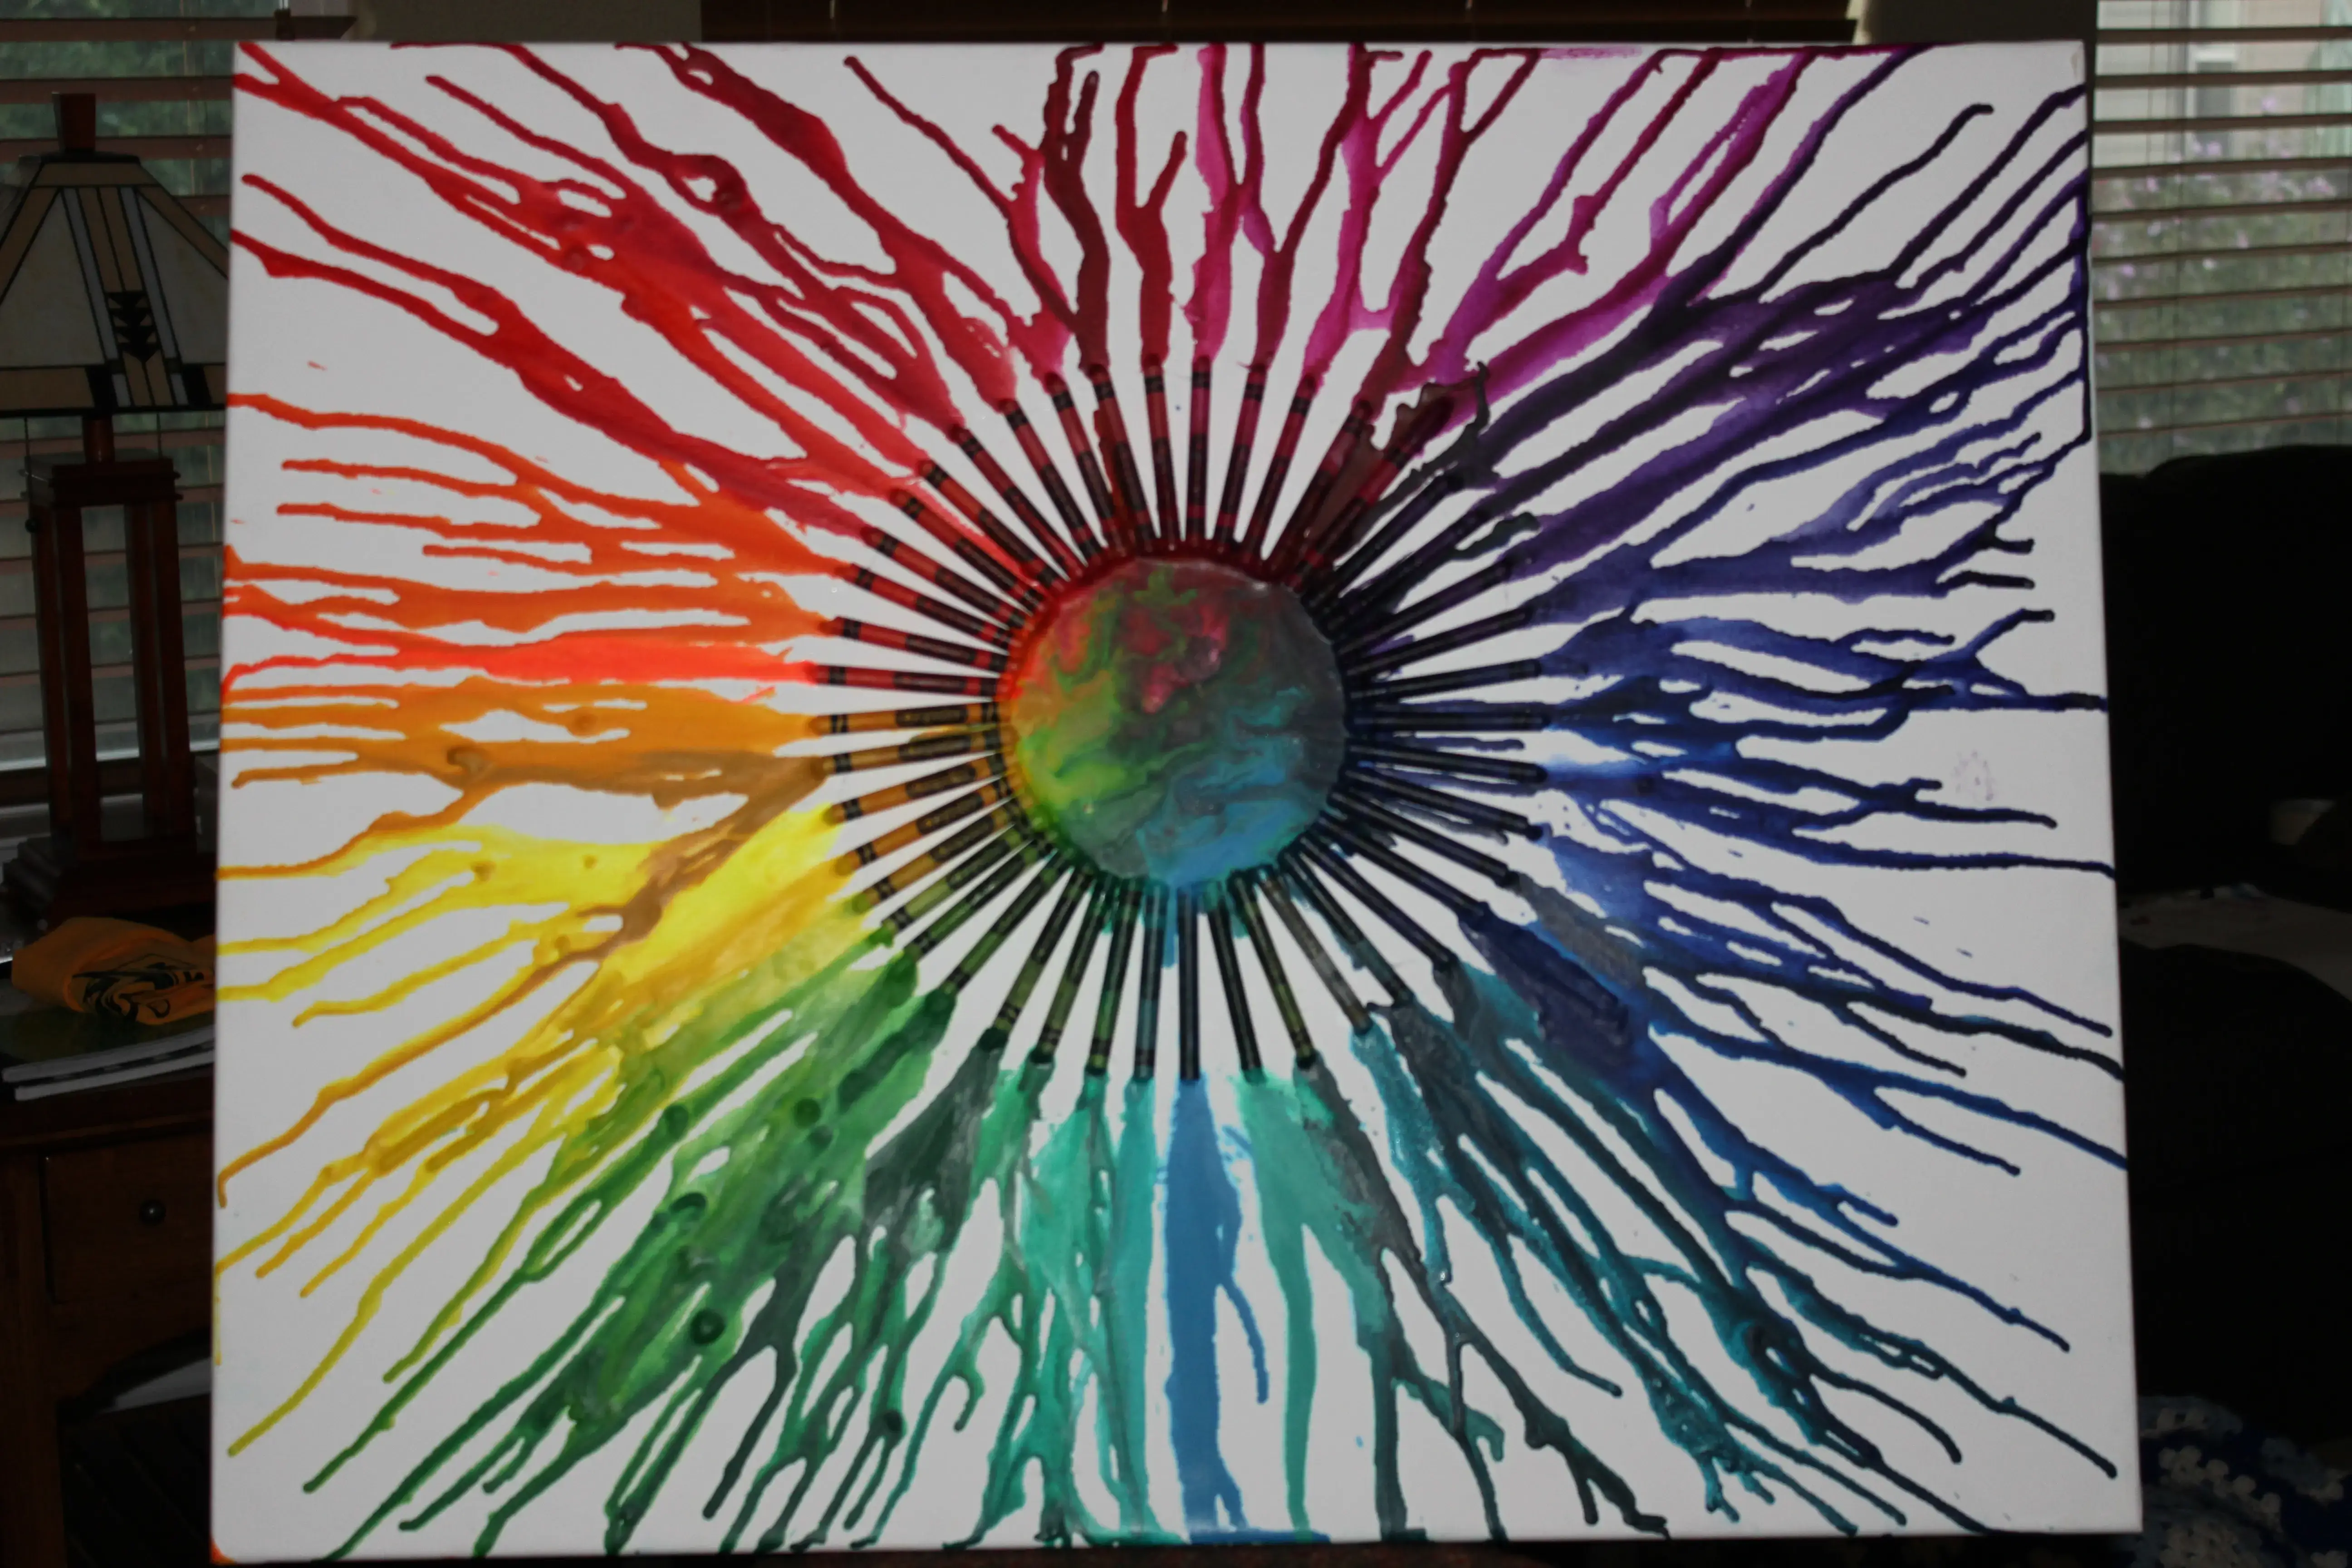 Melting crayons into art with a hairdryer on canvas.